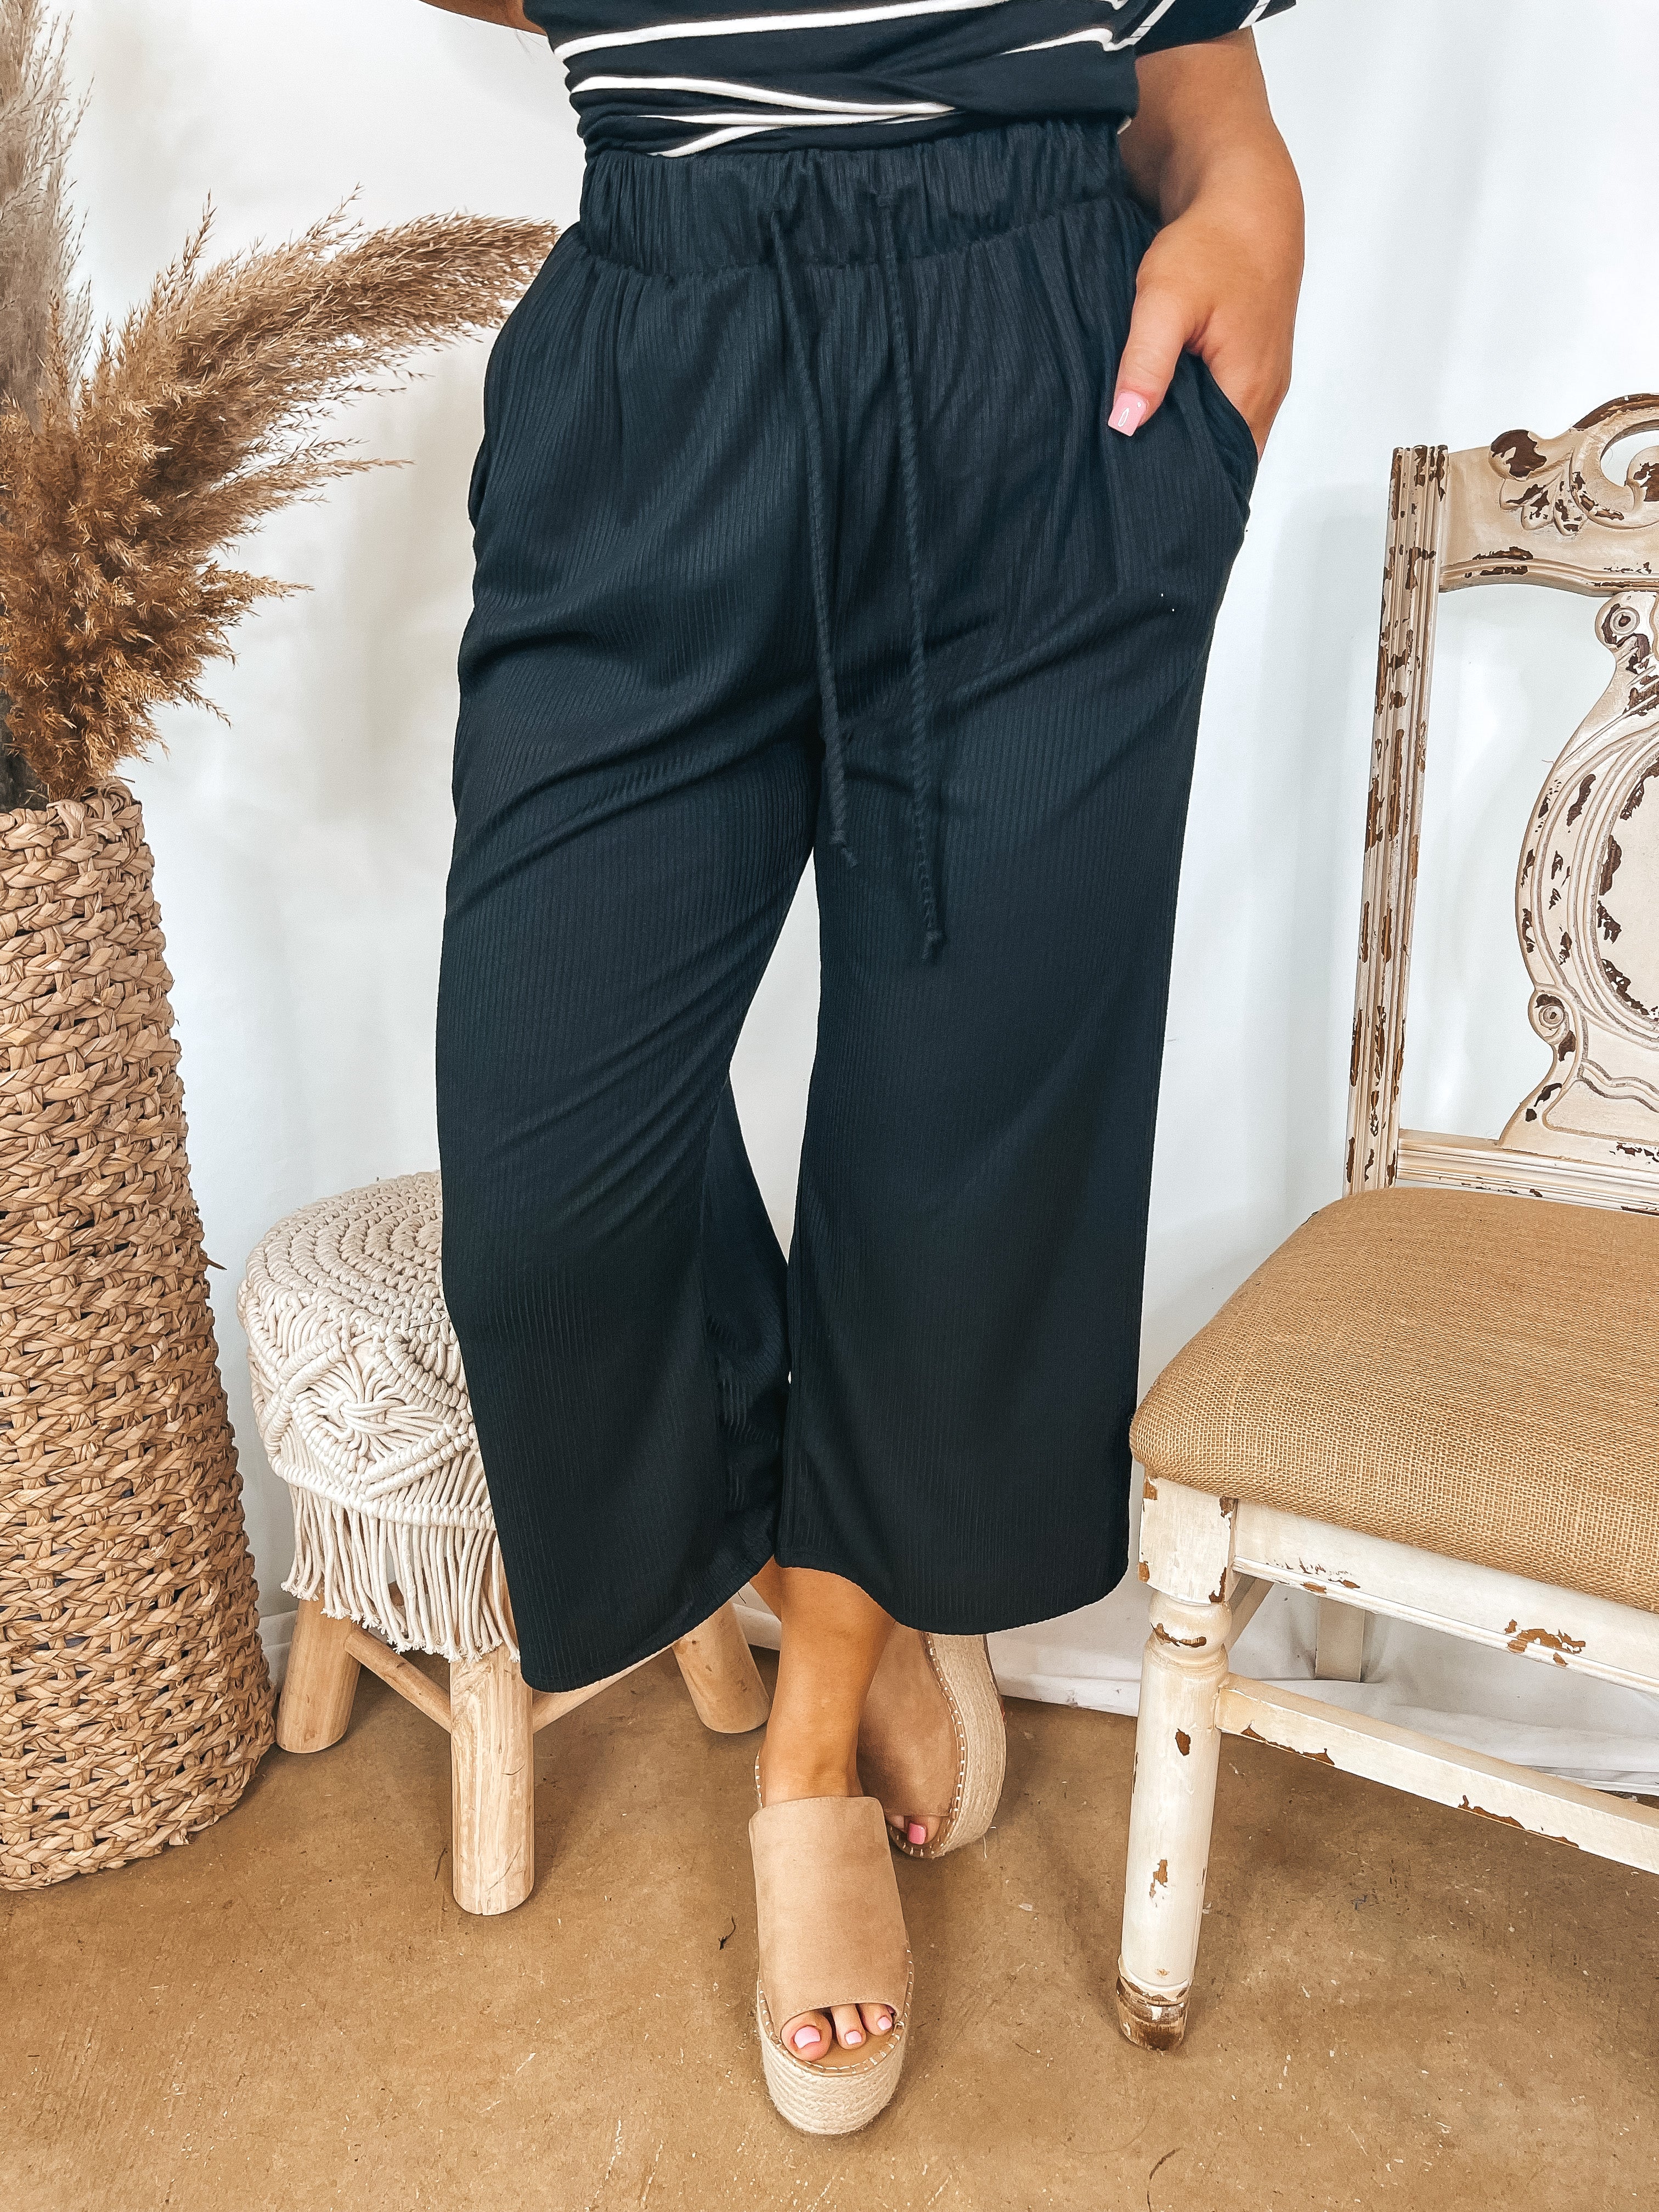 By The Bay Cropped Wide Leg Ribbed Pants in Black - Giddy Up Glamour Boutique